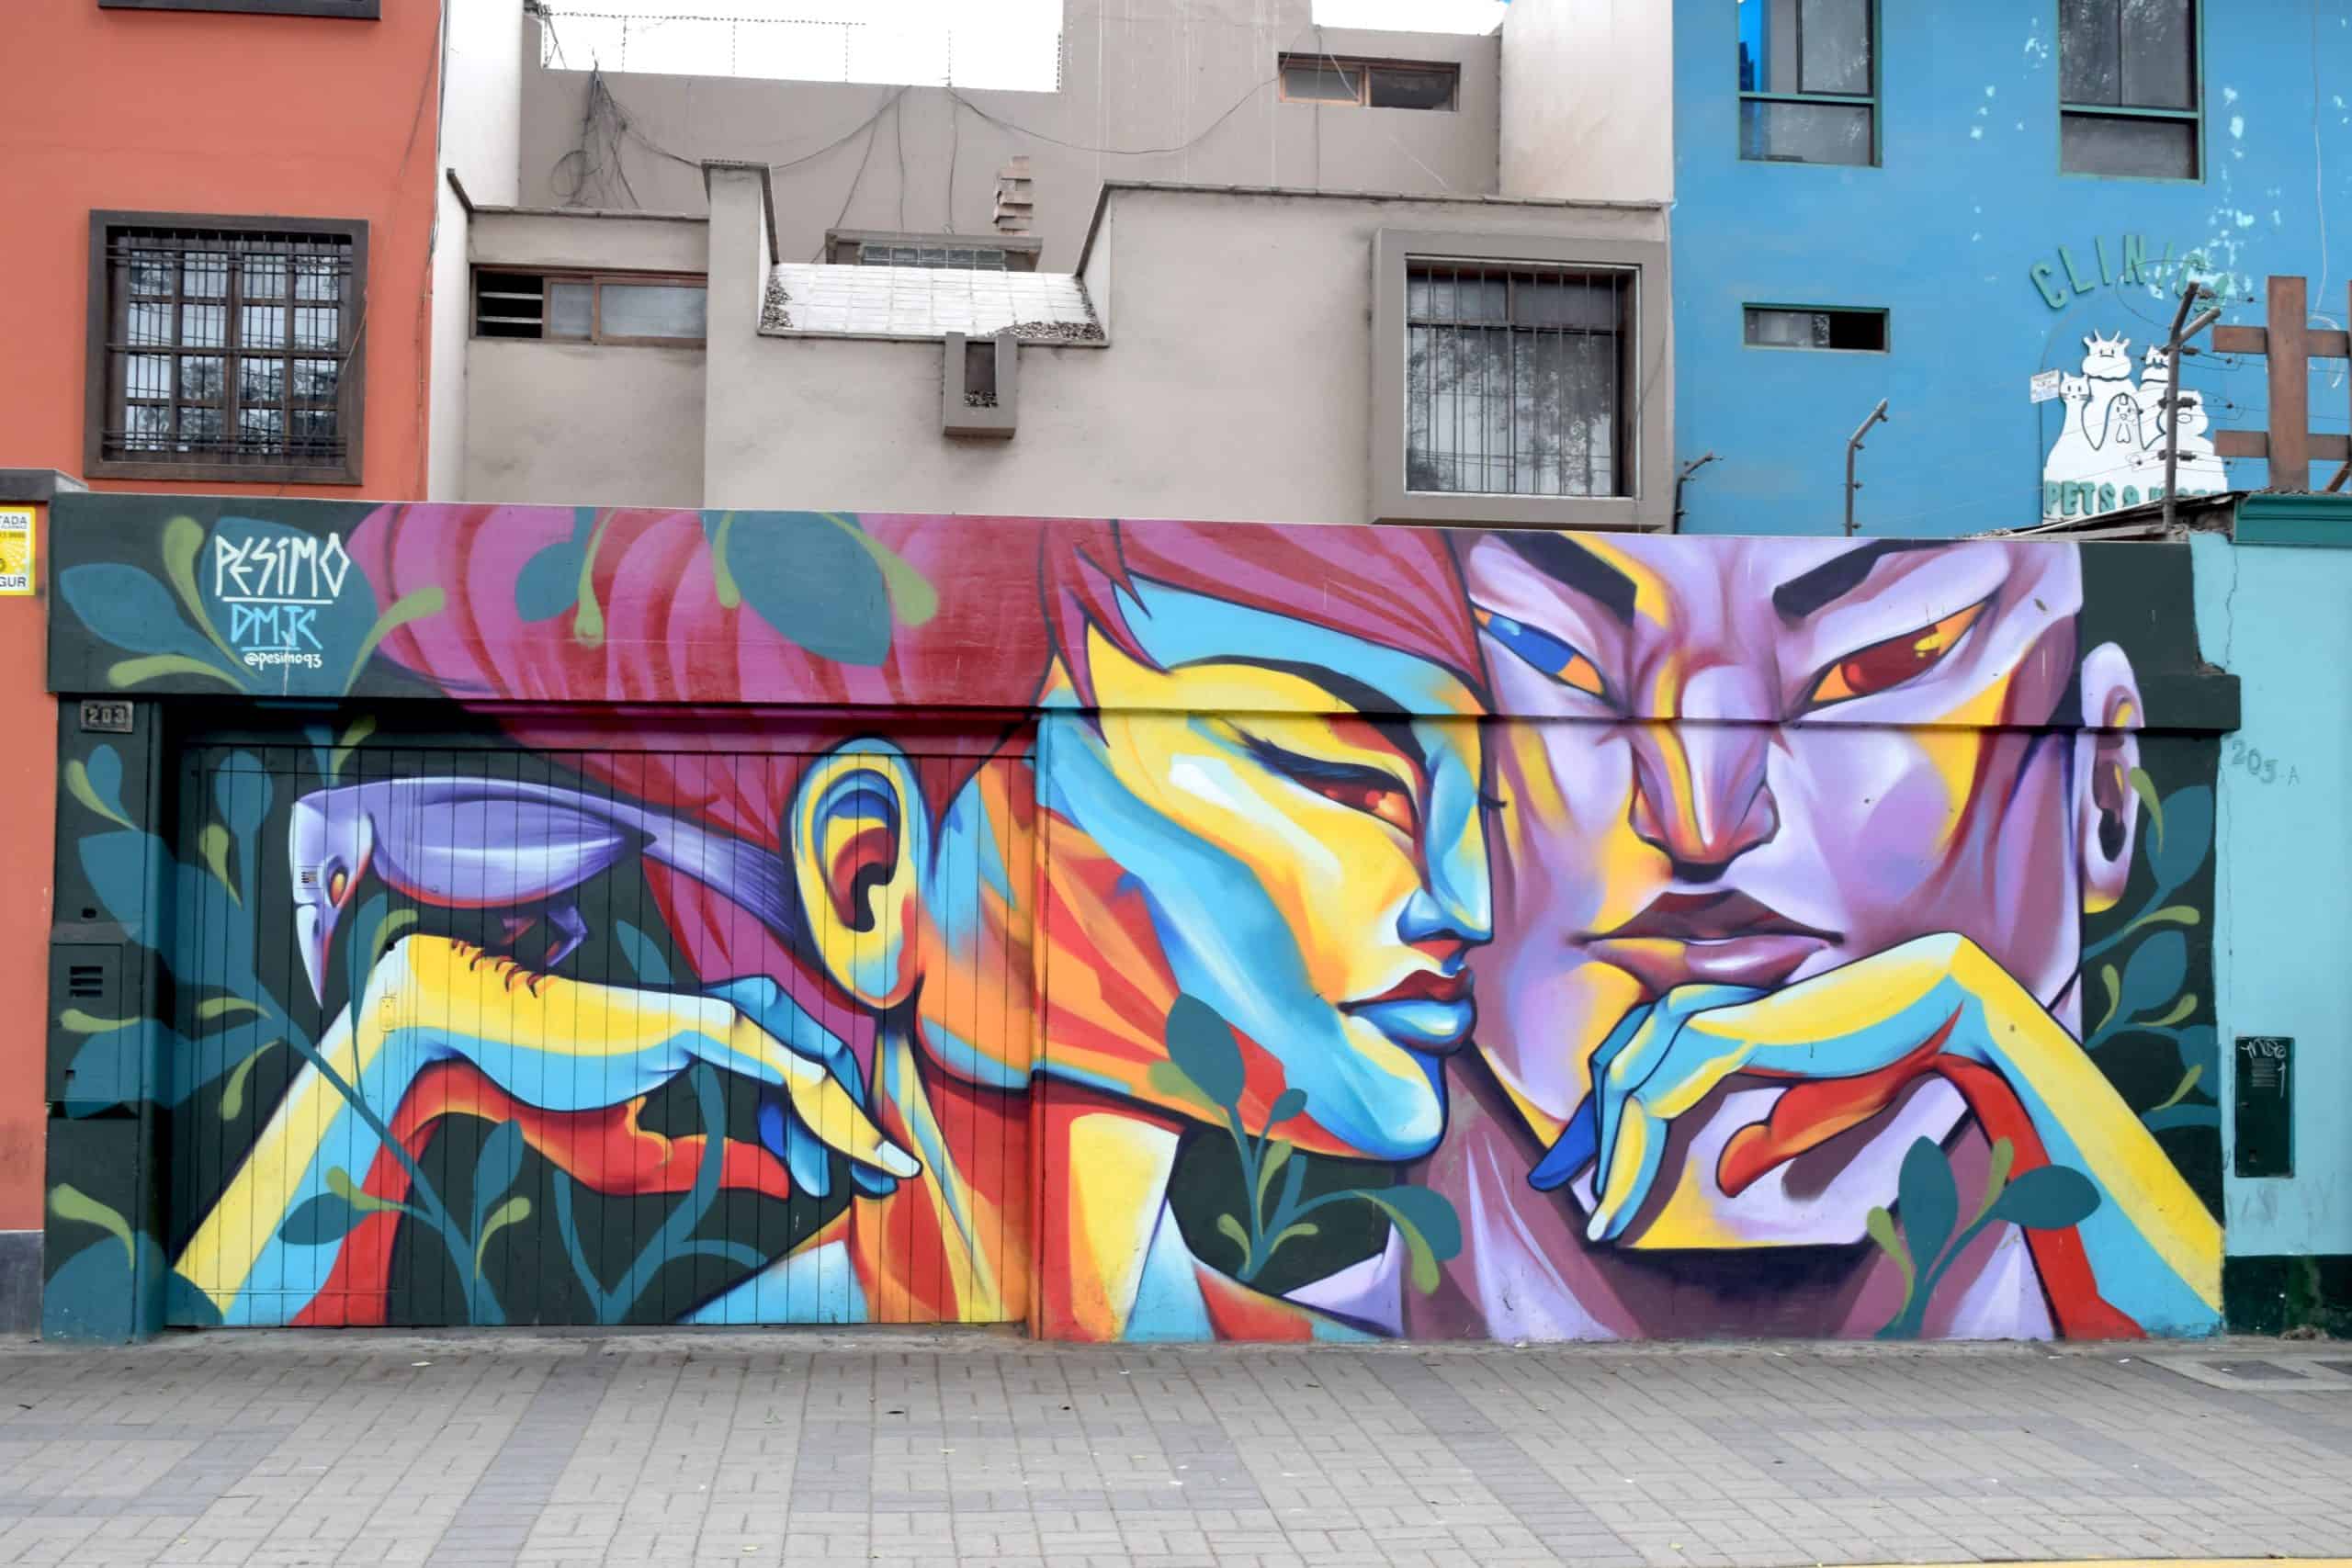 Murals in Barranco, Lima: Lots of street art pictures! To & Fro Fam